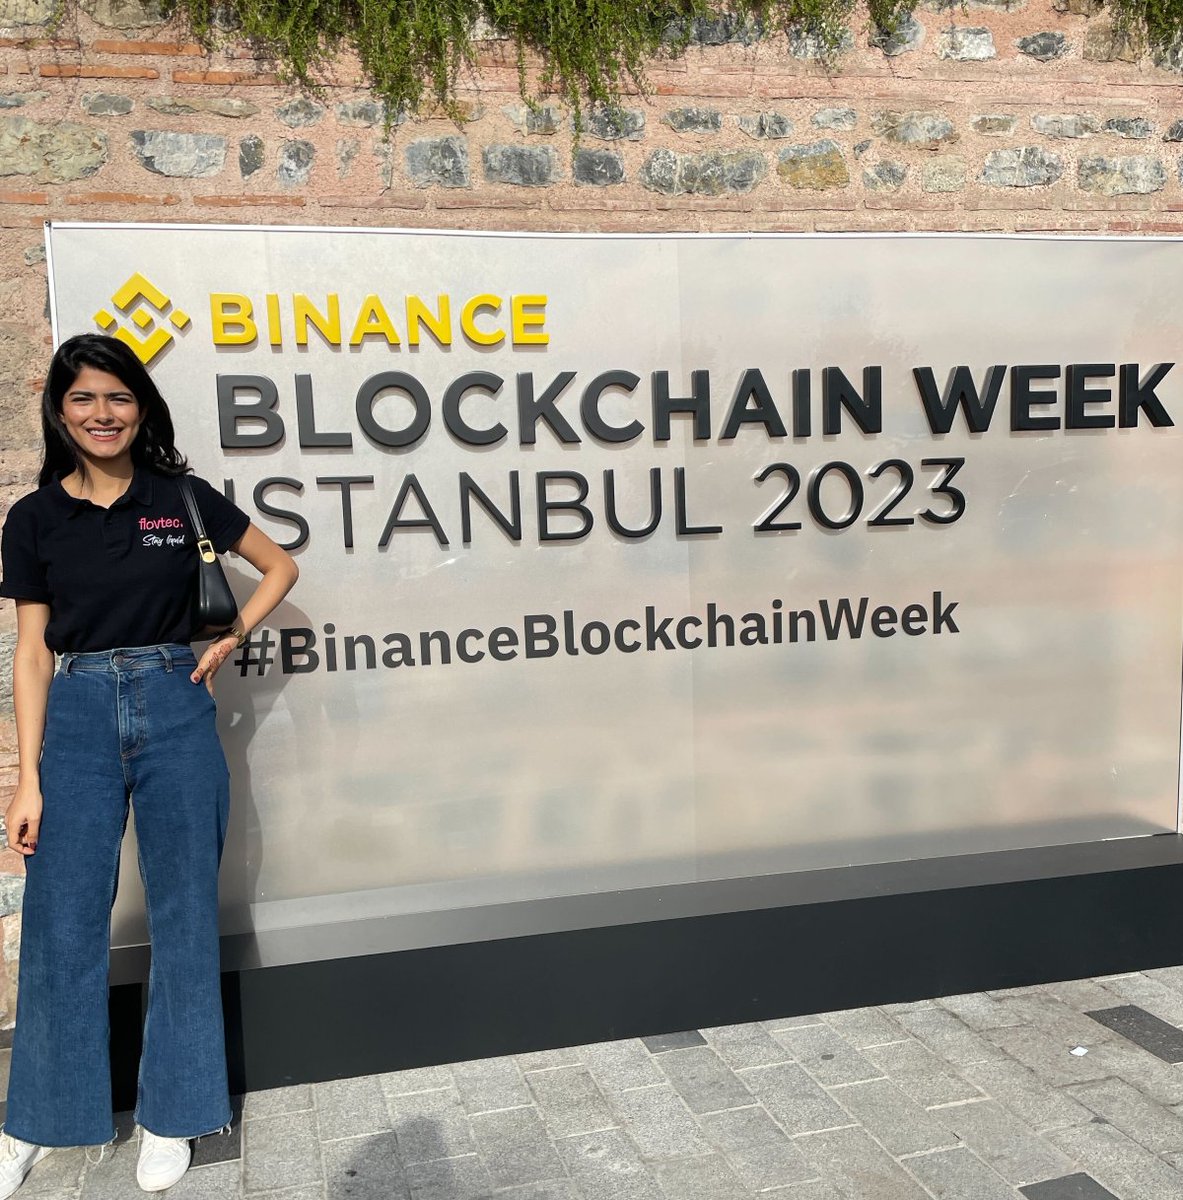 Find us in Istanbul at #BinanceBlockchainWeek and #DevconnectIST this and next week!

We'll be around many side events as well, and are more excited than ever to talk #cryptoliquidity in a time where the digital asset market gains momentum!

#StayLiquid